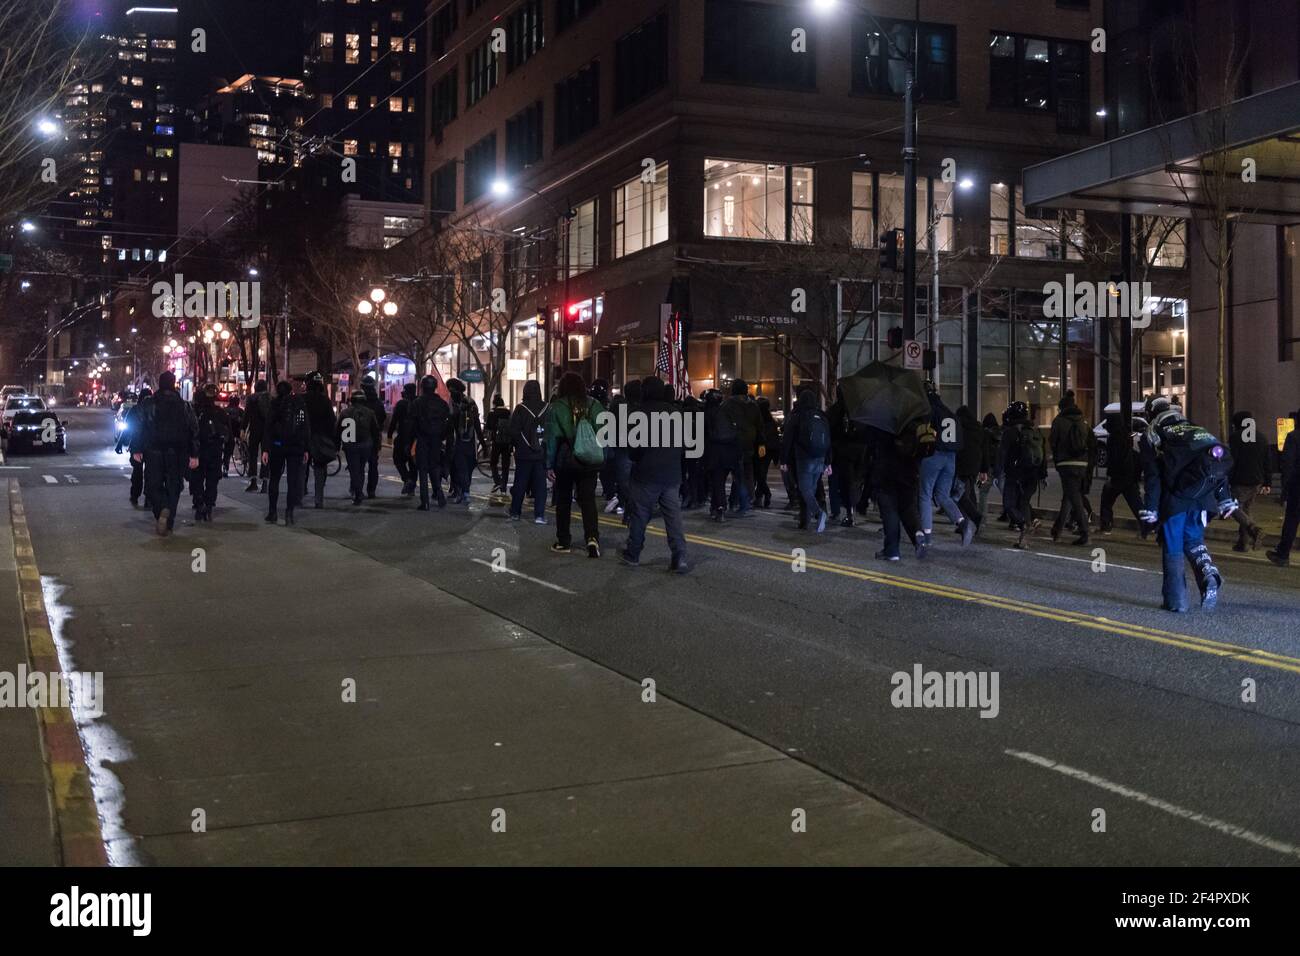 Seattle, USA. 20 Jan, 2021:  Early in the evening protestors marching during the abolish Ice inauguration protest. Stock Photo